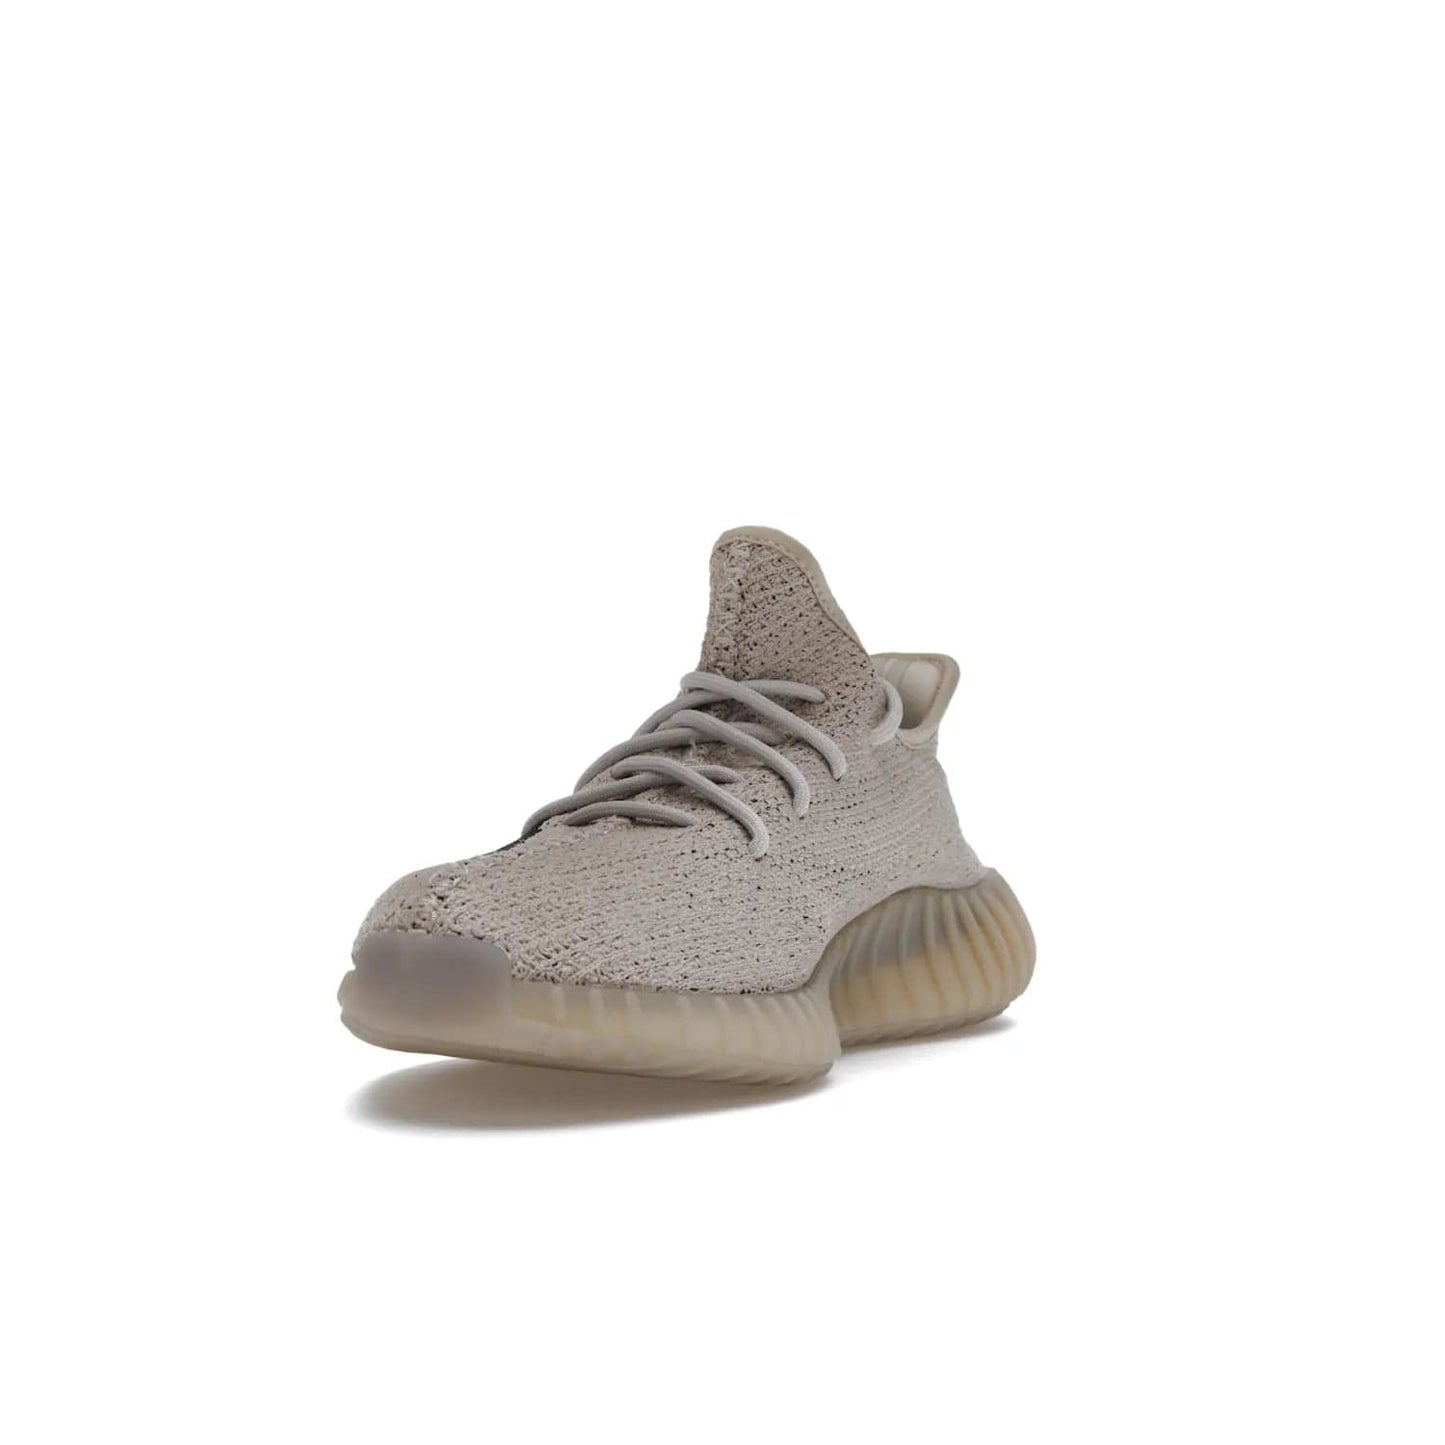 adidas Yeezy Boost 350 V2 Slate - Image 13 - Only at www.BallersClubKickz.com - Adidas Yeezy Boost 350 V2 Slate Core Black Slate featuring Primeknit upper, Boost midsole and semi-translucent TPU cage. Launched on 3/9/2022, retailed at $230.